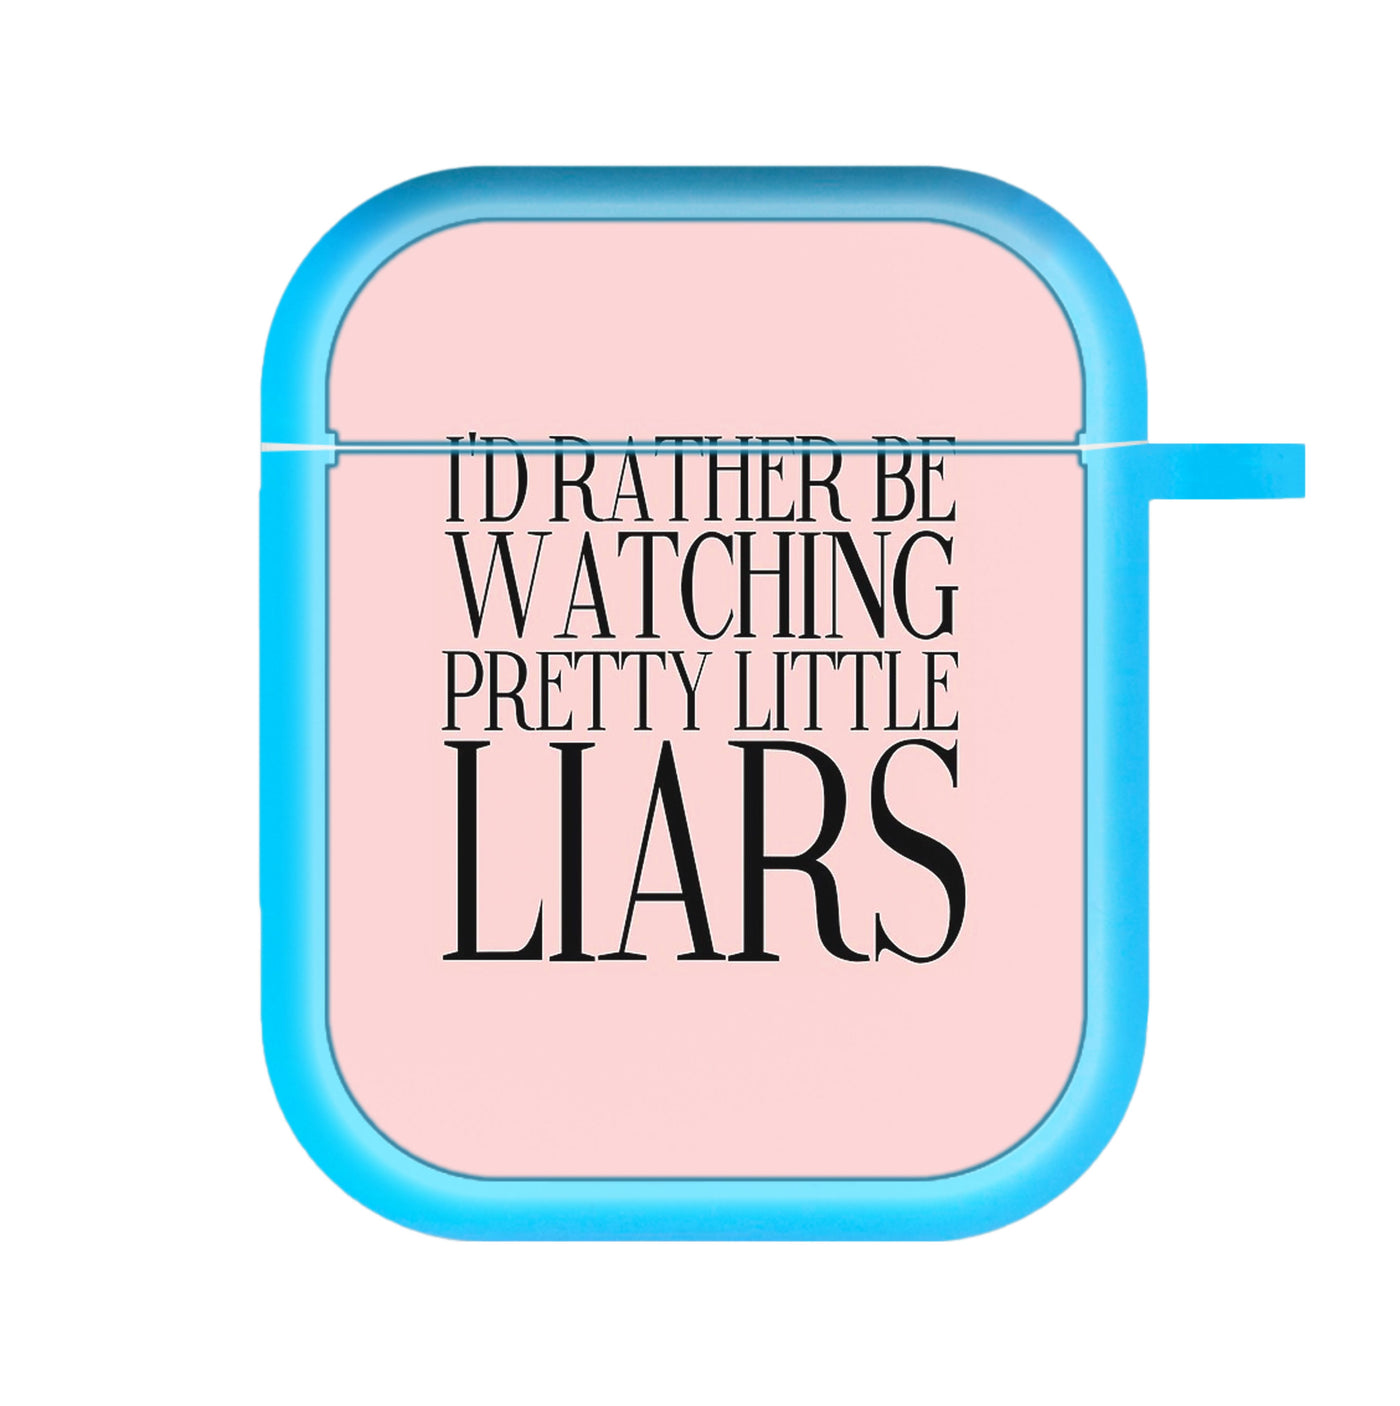 Rather Be Watching Pretty Little Liars... AirPods Case